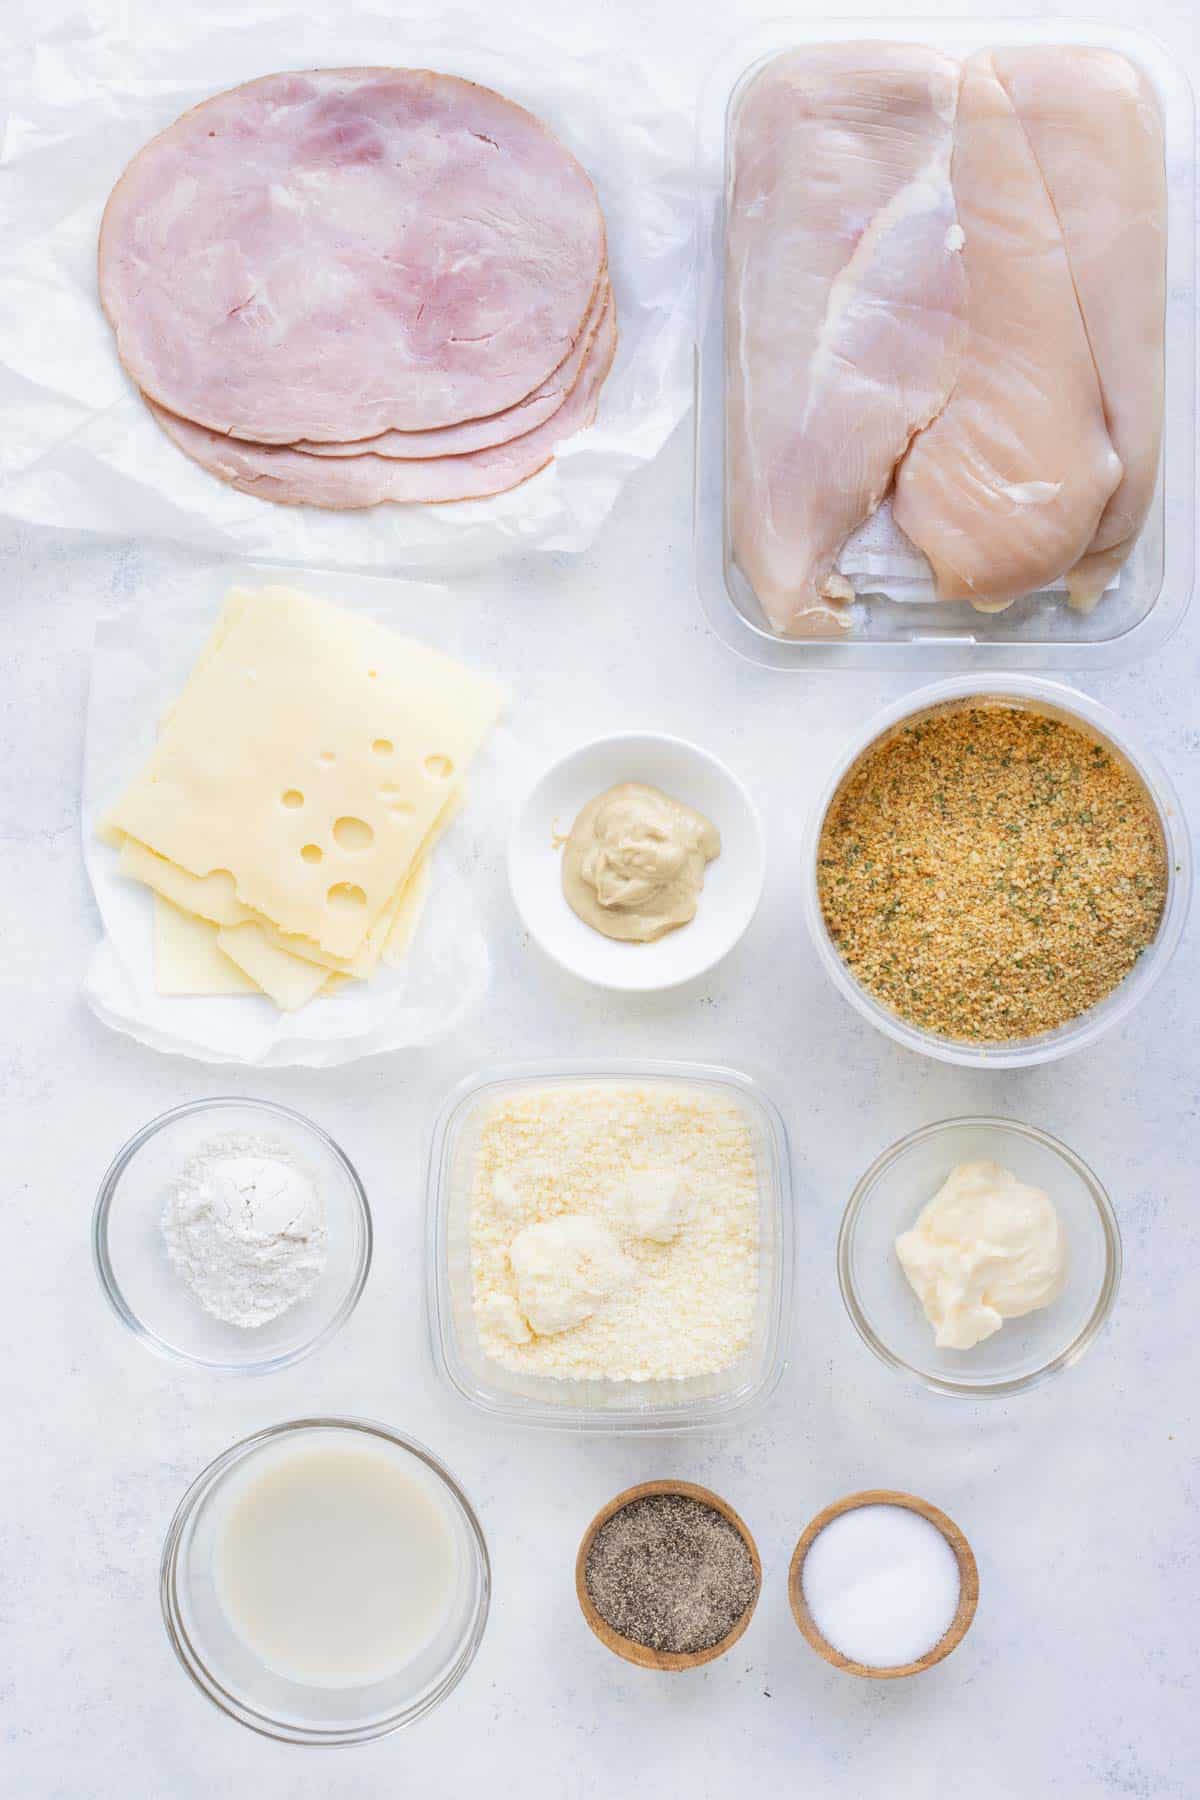 Chicken, ham, Swiss cheese, mayo, mustard, flour, breadcrumbs, and seasonings are the ingredients for chicken cordon bleu.